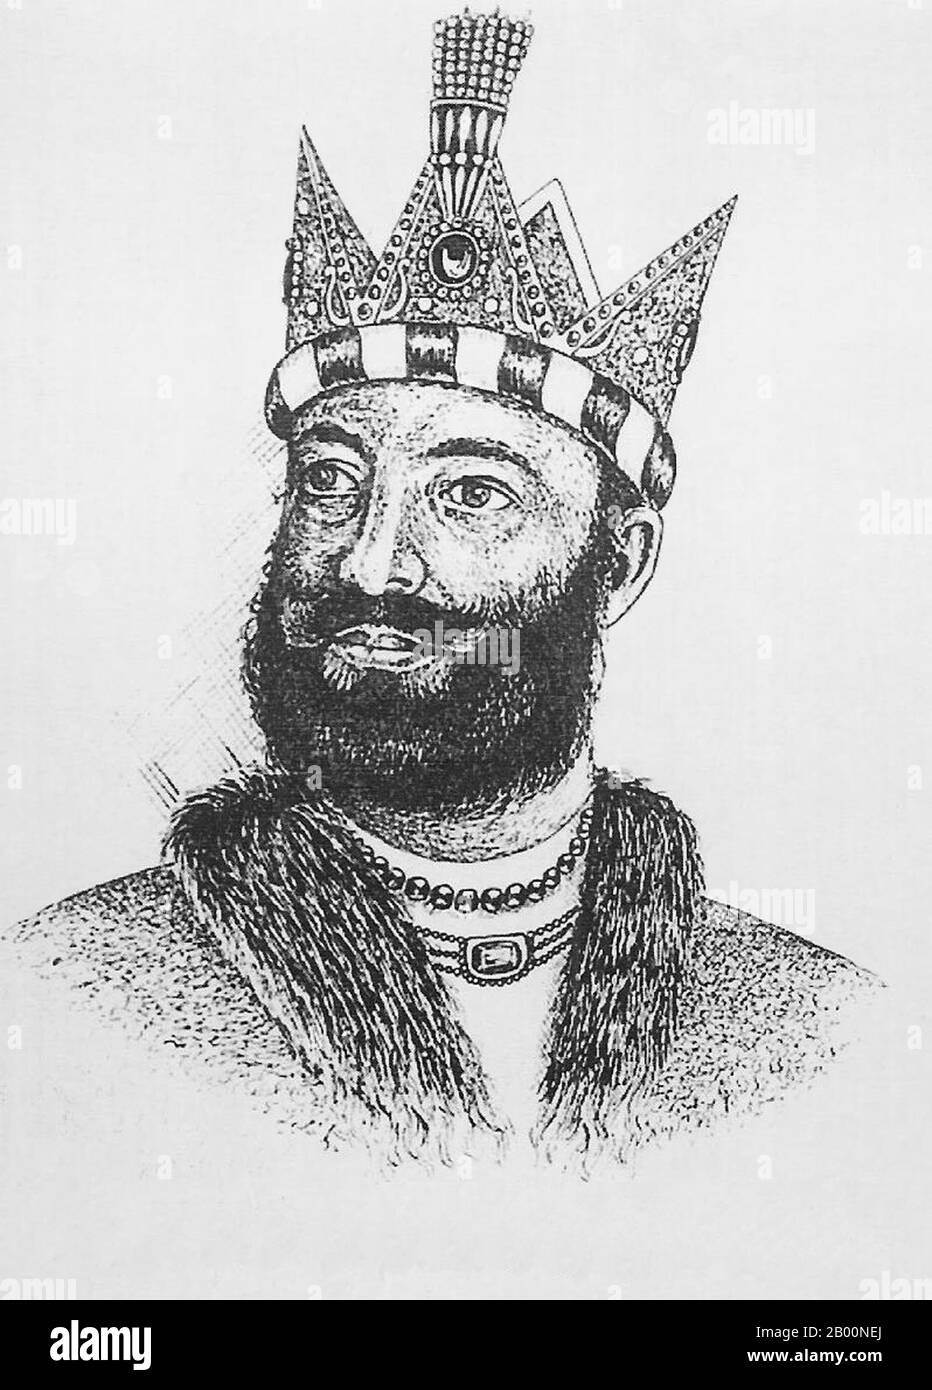 Afghanistan: Sultan Mahmud of Ghazni (997-1030). Sketch by Maulvi Abdurab Ahadi.  Mahmud of Ghazni (November 2, 971 - April 30, 1030) was the most prominent ruler of the Ghaznavid dynasty and ruled from 997 until his death in 1030. Mahmud turned the former provincial city of Ghazni (now in Afghanistan) into the wealthy capital of an extensive empire which extended from Afghanistan into most of Iran as well as Pakistan and regions of North-West India. Stock Photo